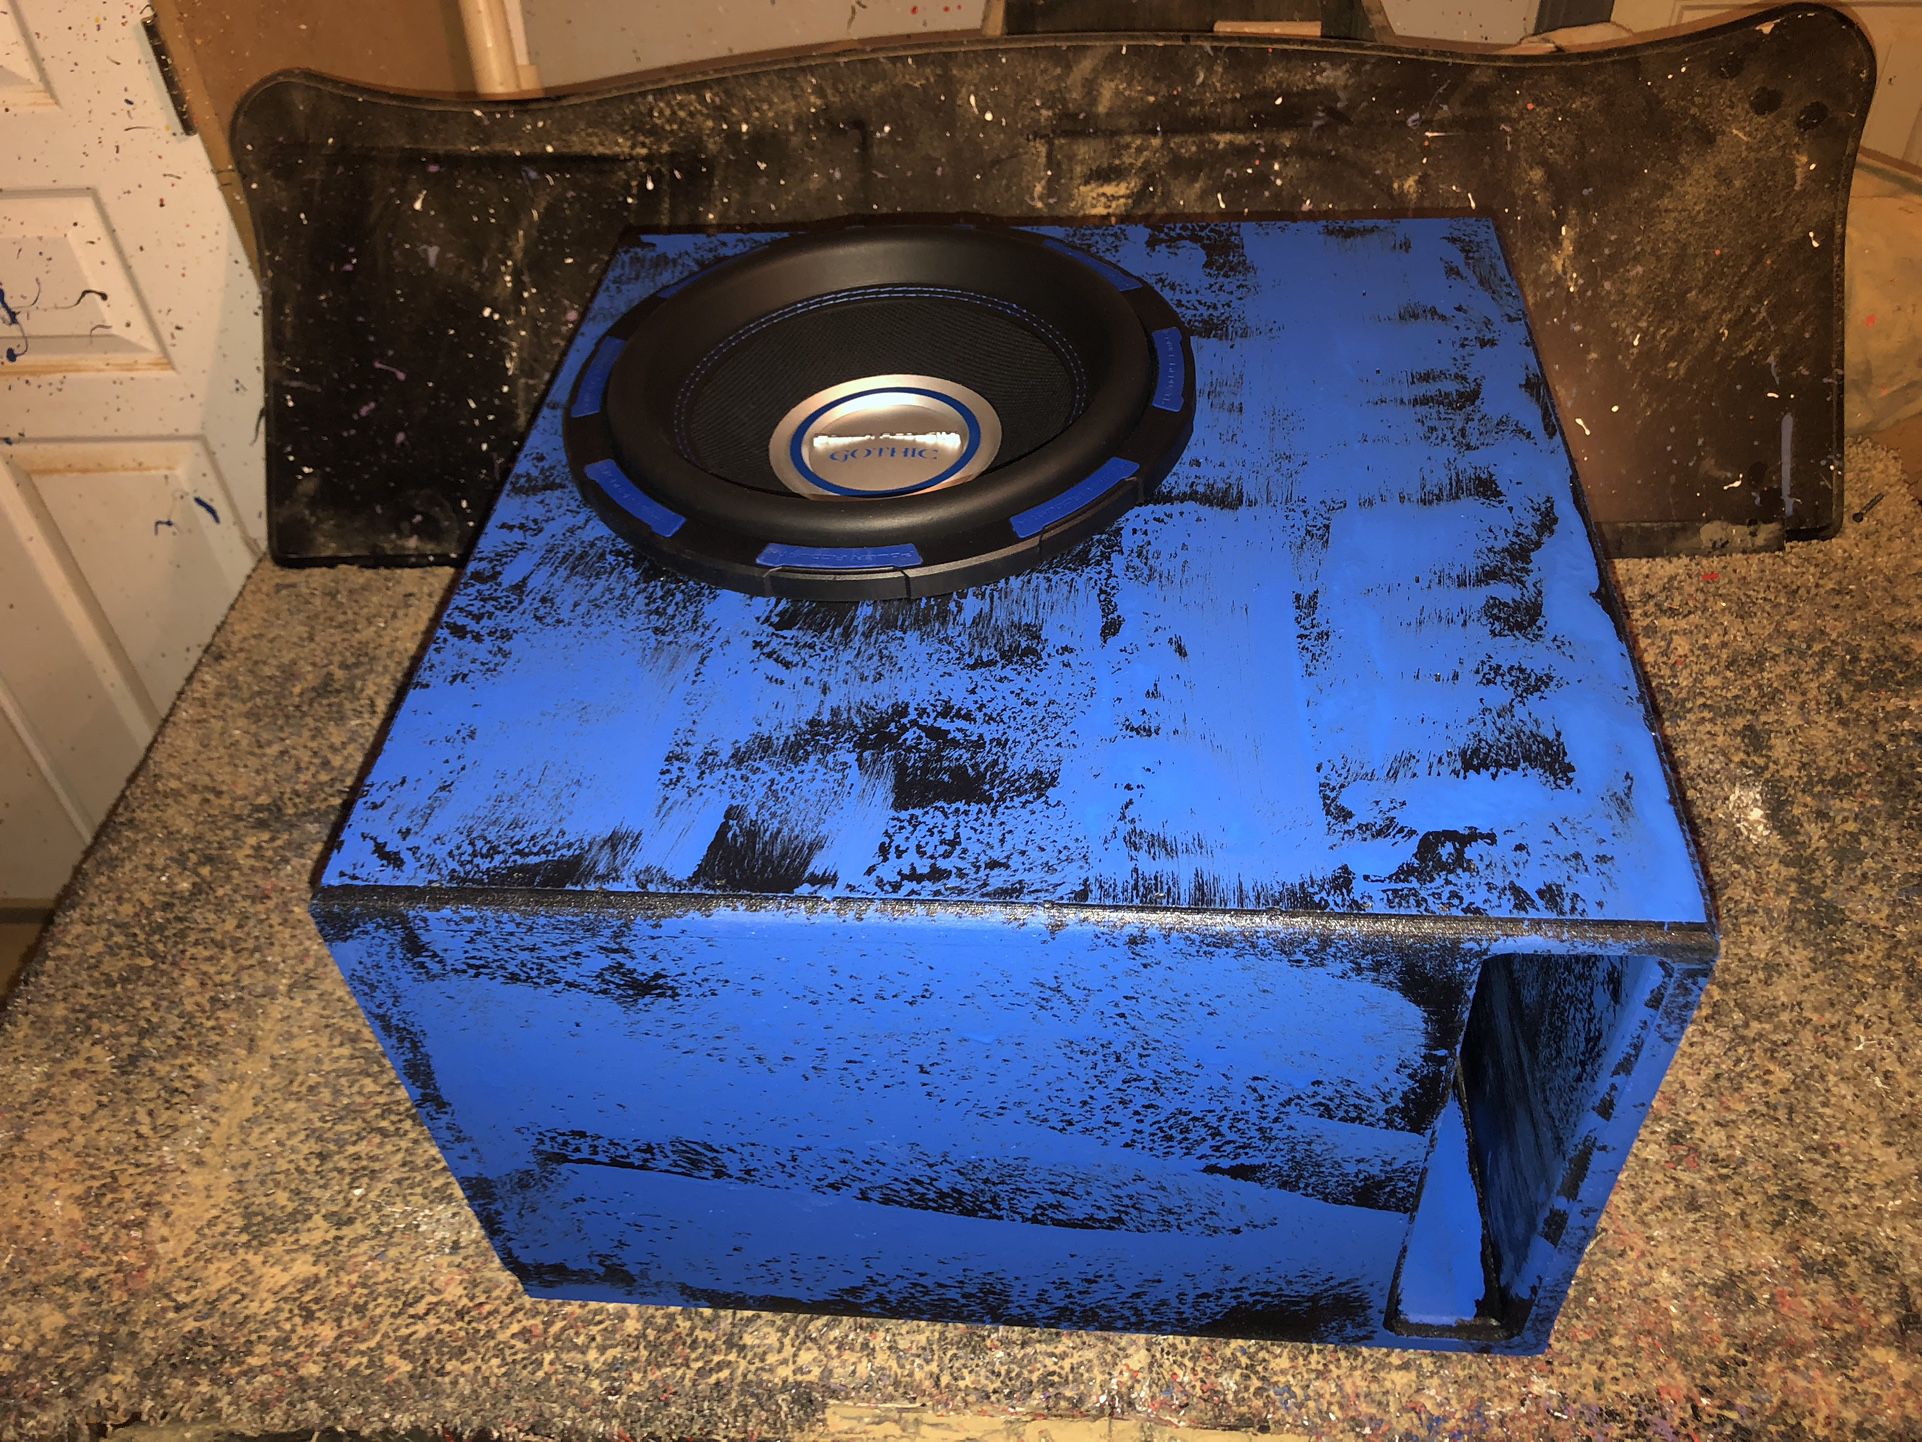 //All Brand New//..12 Inch Power Acoustic Subwoofer Custom Built Ported Box Tuned 34 Hrz..sub&box&amp